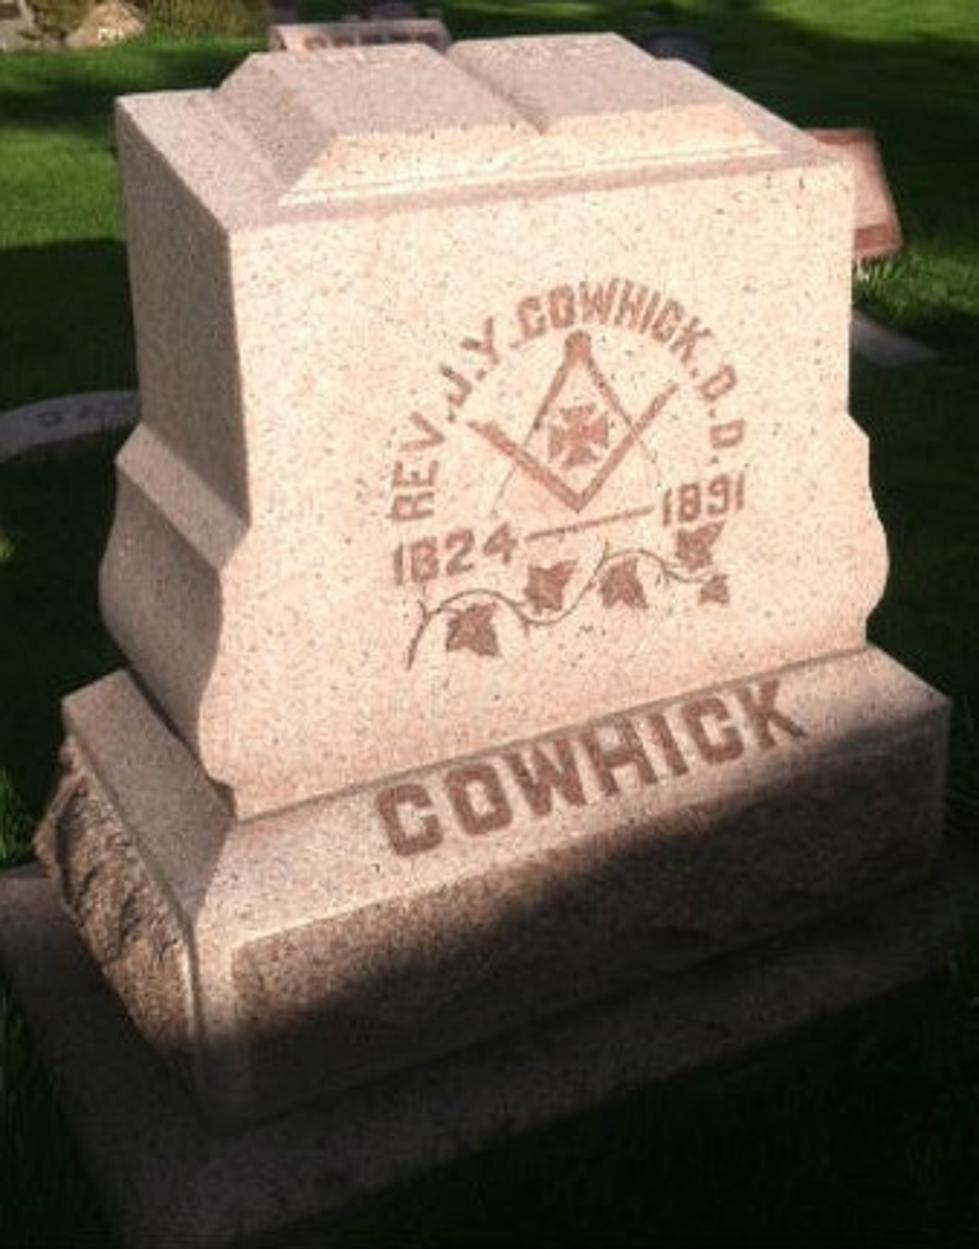 A Good Friday Tribute to One of Cheyenne’s First Ministers, Dr. John Cowhick